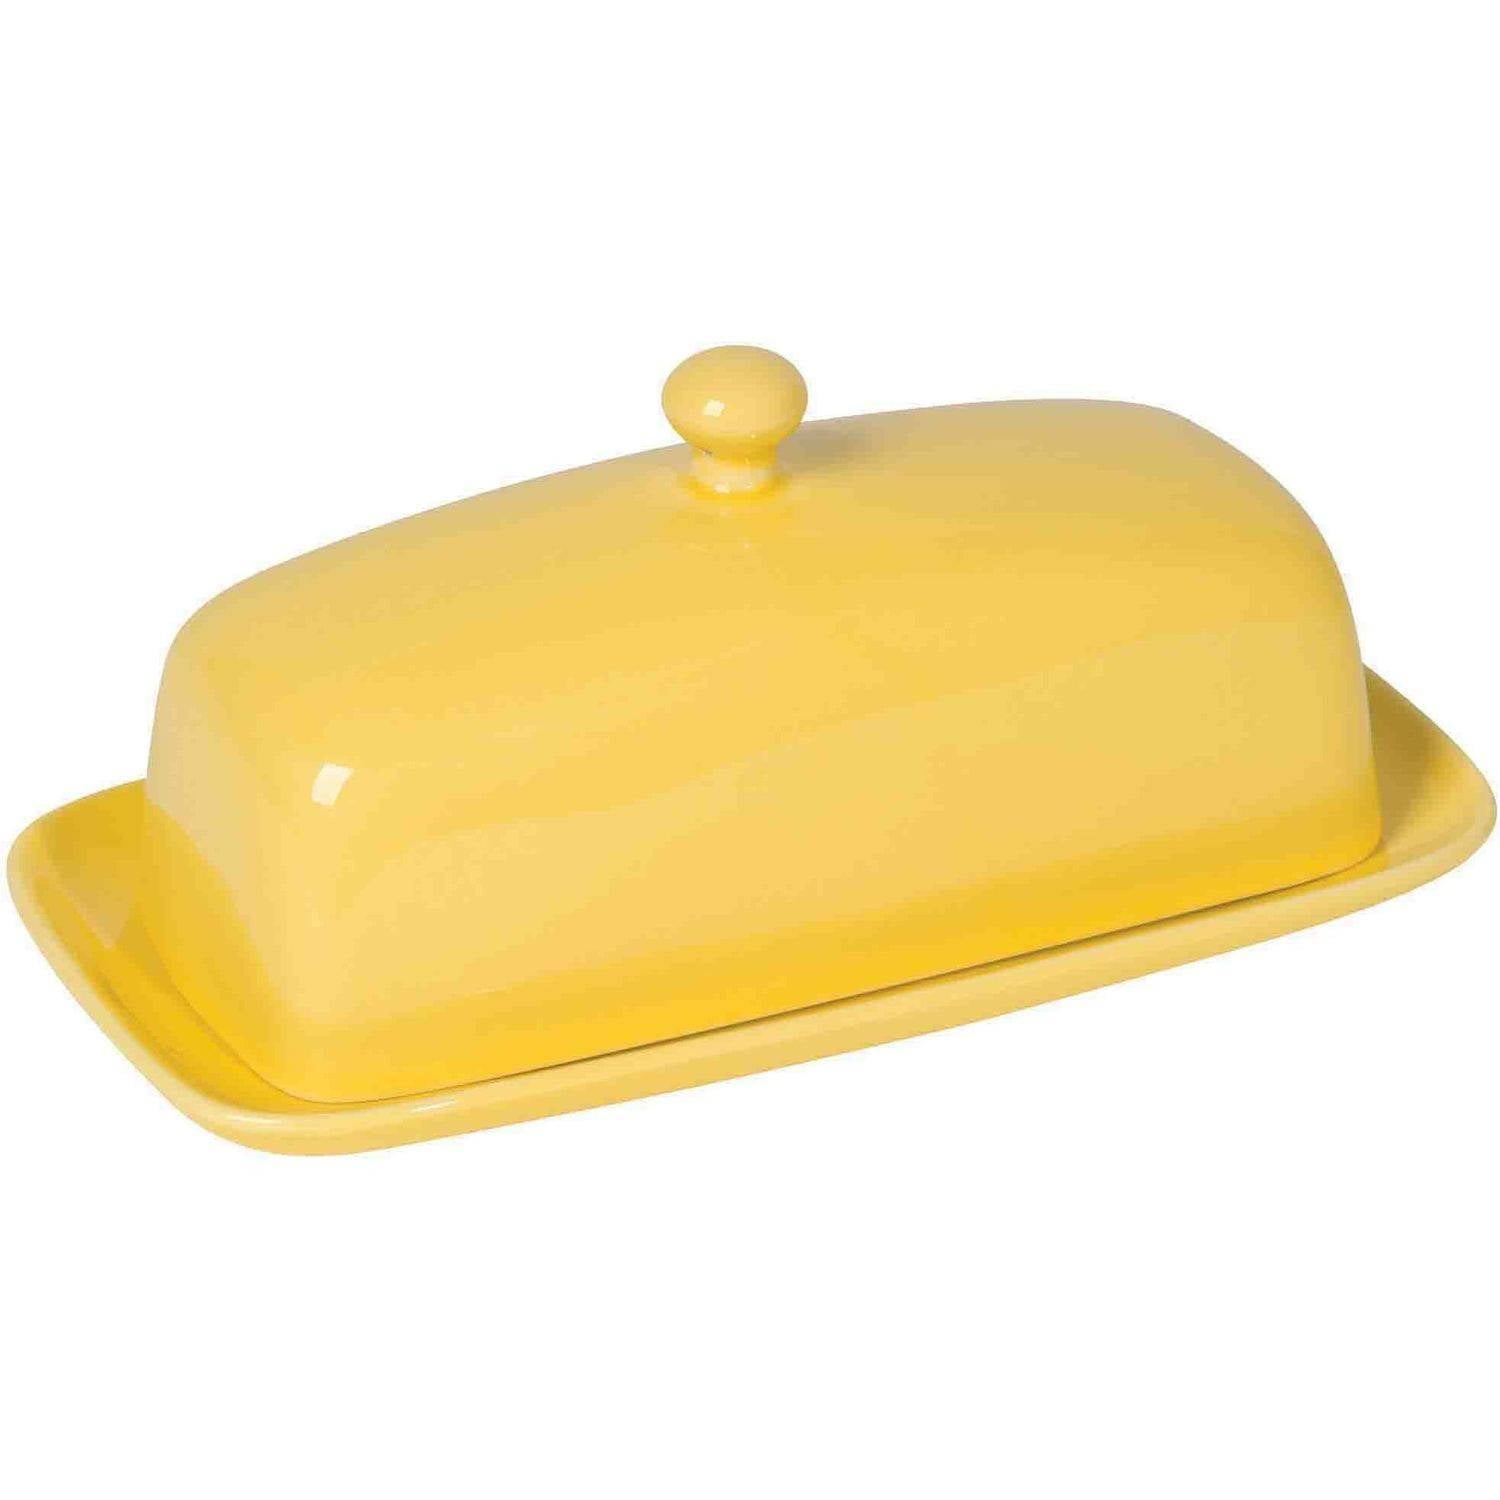 Eggshell Now Designs Square Butter Dish 